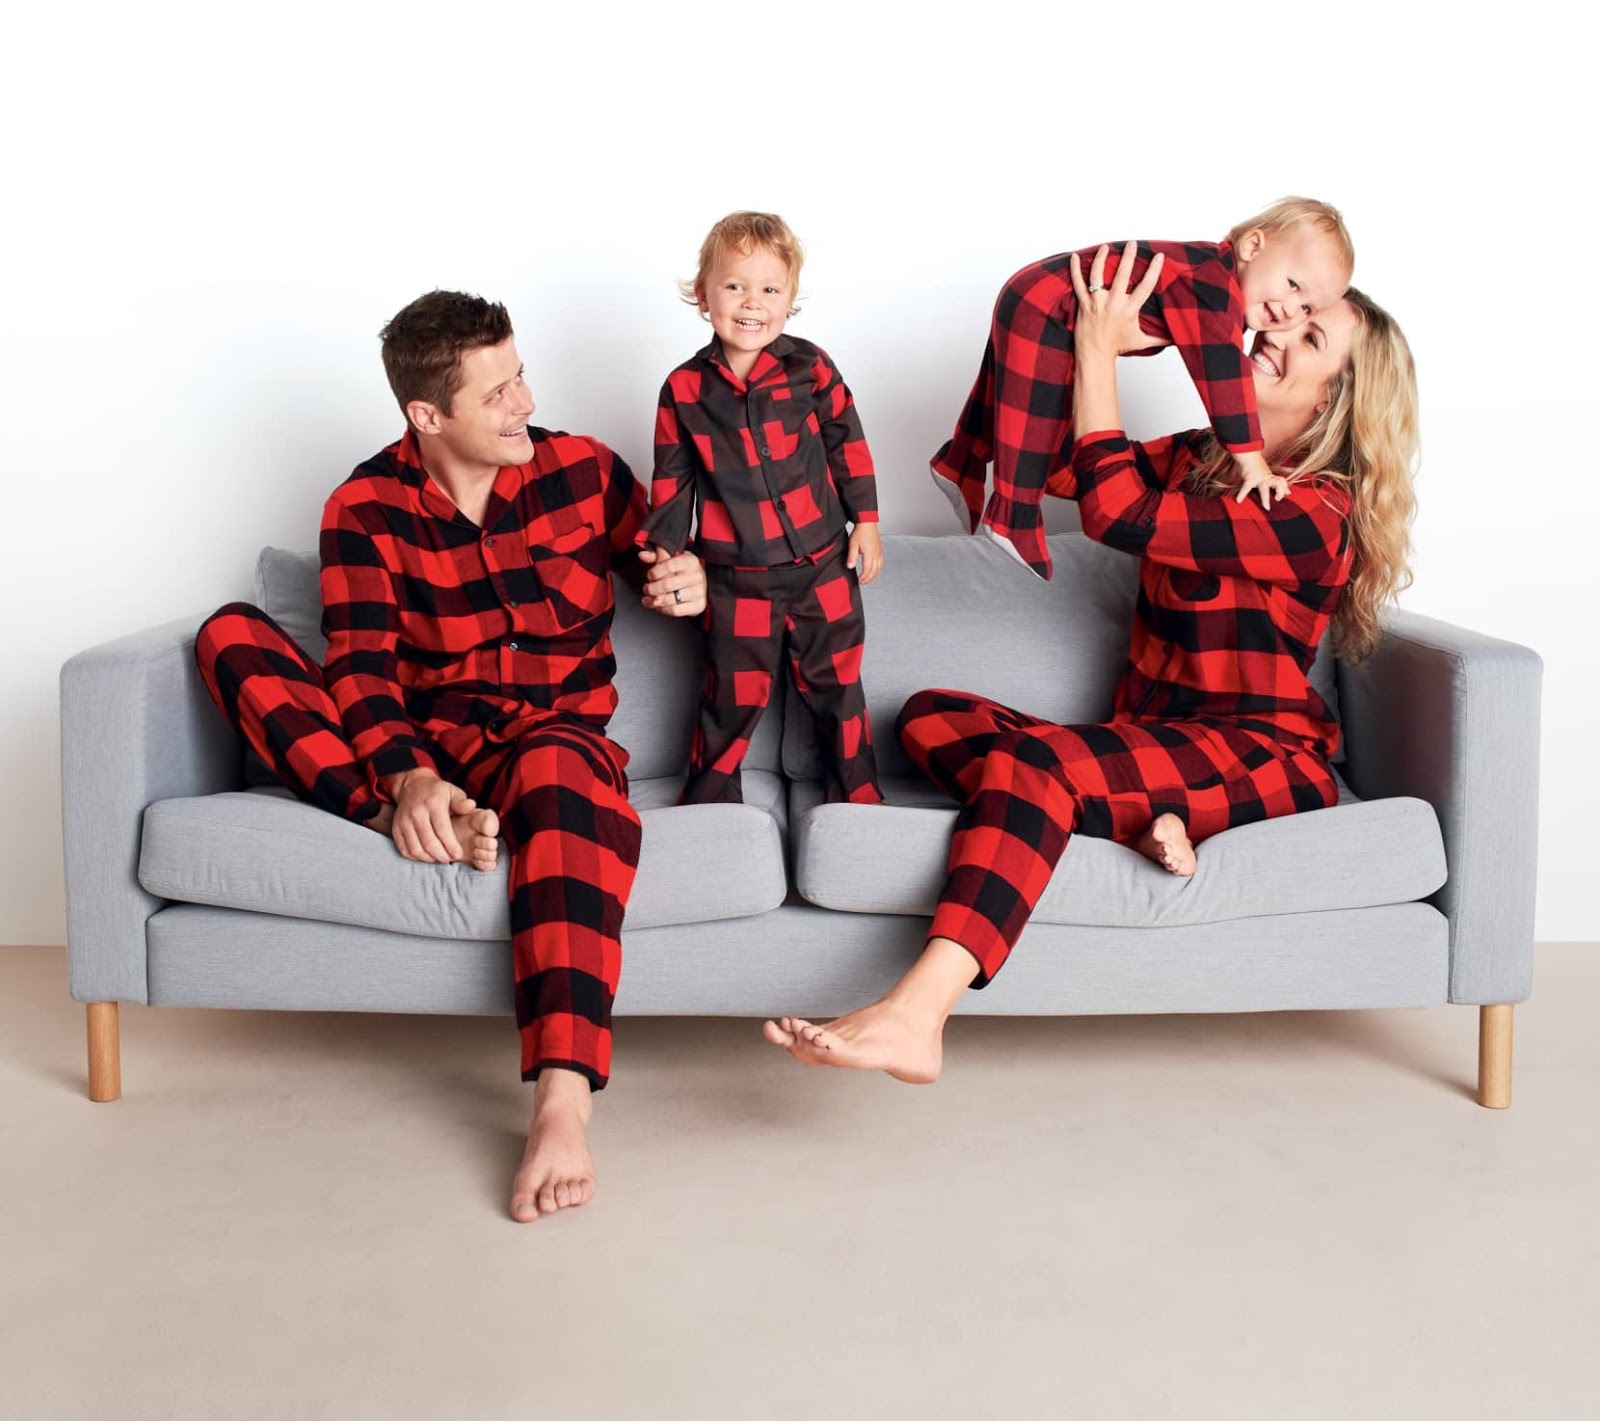 5 Sets of the Cutest Matching Family Christmas Pajamas! Daphnie Pearl Blog family christmas pajamas matching idea photo photographer picture pictures christmas tree buffalo plaid grinch polar bear fuzzy warm comfortable lounge snowflake